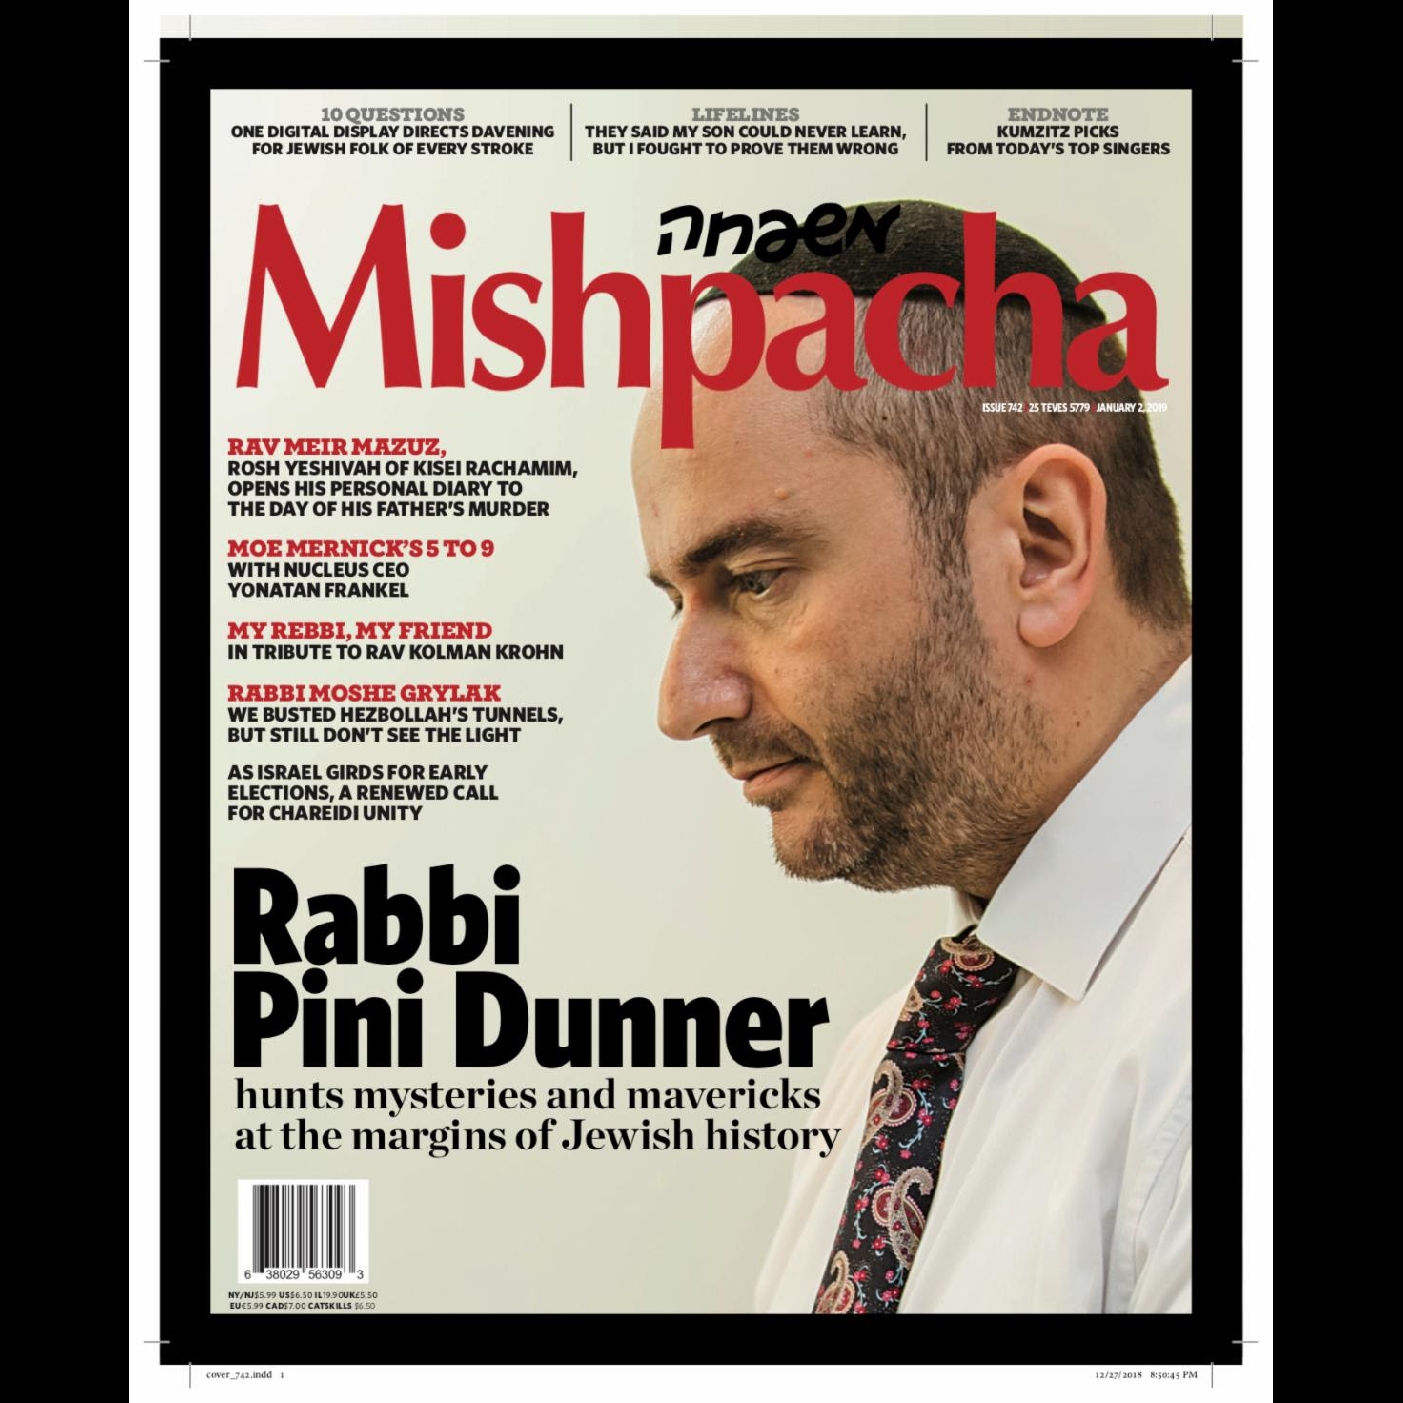 Talkline with Zev Brenner with Rabbi Pini Dunner. Was the Chaim Walder story mishandled? who is to blame?